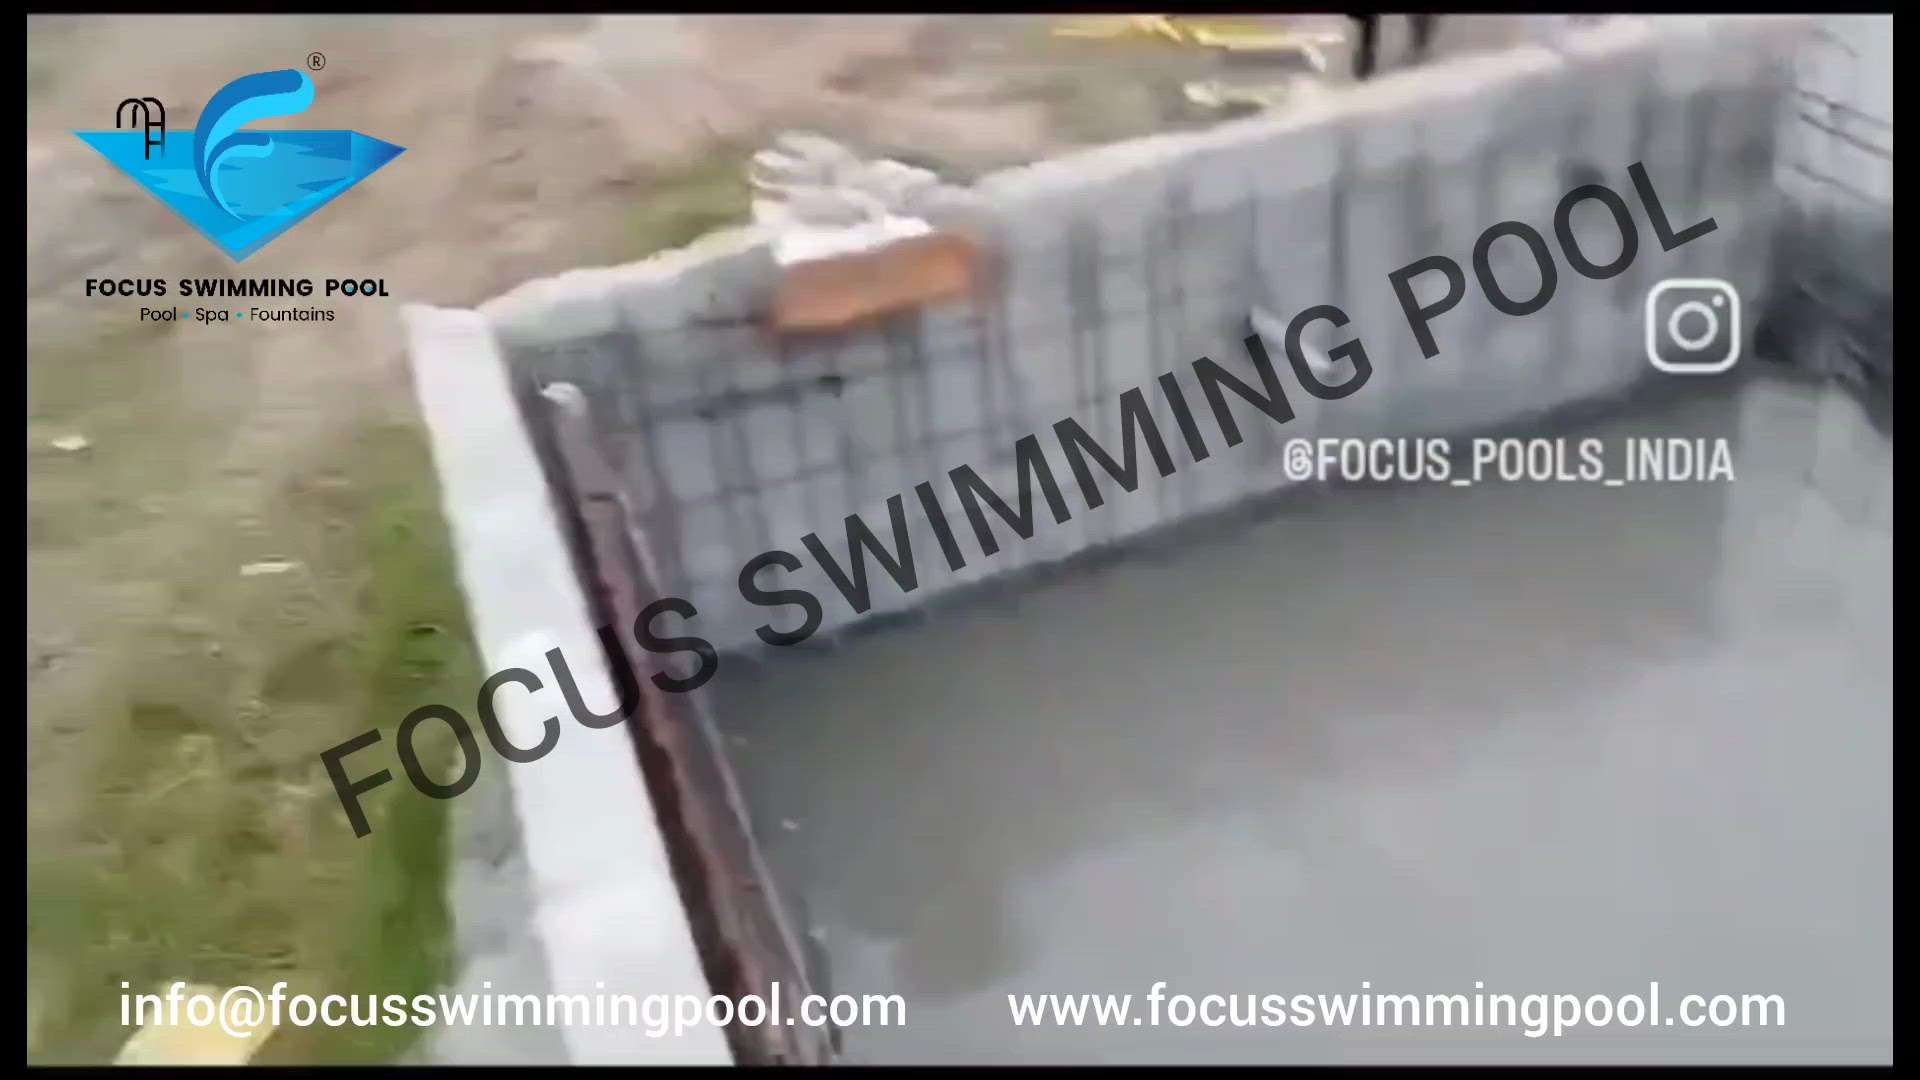 Our ongoing .#turnkeyproject . 25 x 10mts semi Olympic size pool work is in progress @pondicherry for our client Mr. Tamil selvam... This pool is Designed & building by FOCUS SWIMMING POOL.. @focus_swimming_pool  @focus_pools_india

For Affordable, Quality, and Expert Swimming Pool and Landscape Services.

Focus Swimming Pool Construction Services are offered:

💦 Swimming Pool Construction
💦 Swimming Pool Repair and Renovation
💦 Swimming Pool Design, Jacuzzi Spa, and Infinity
💦 Swimming Pool Plumbing Work
💦 Swimming Pool Maintenance Services
💦Landscape and Waterfalls, Grotto, Fountain, Trellis, Gazebo, and Koi Pond

✅ FREE ESTIMATE 
✅ FREE SITE VISIT 
✅ FREE 3D & 2D PLAN

For faster transactions, 
FOCUS POOLS 
☎️ Inquire us: 9994949475 /  9444218864 
📩 Email us: info@focusswimmingpool.com 

For those who are looking for a Swimming Pool Contractor Feel Free to message us here on our page
Focus Swimming Pool Construction & water features work #swimmingpoolconstructionconpany